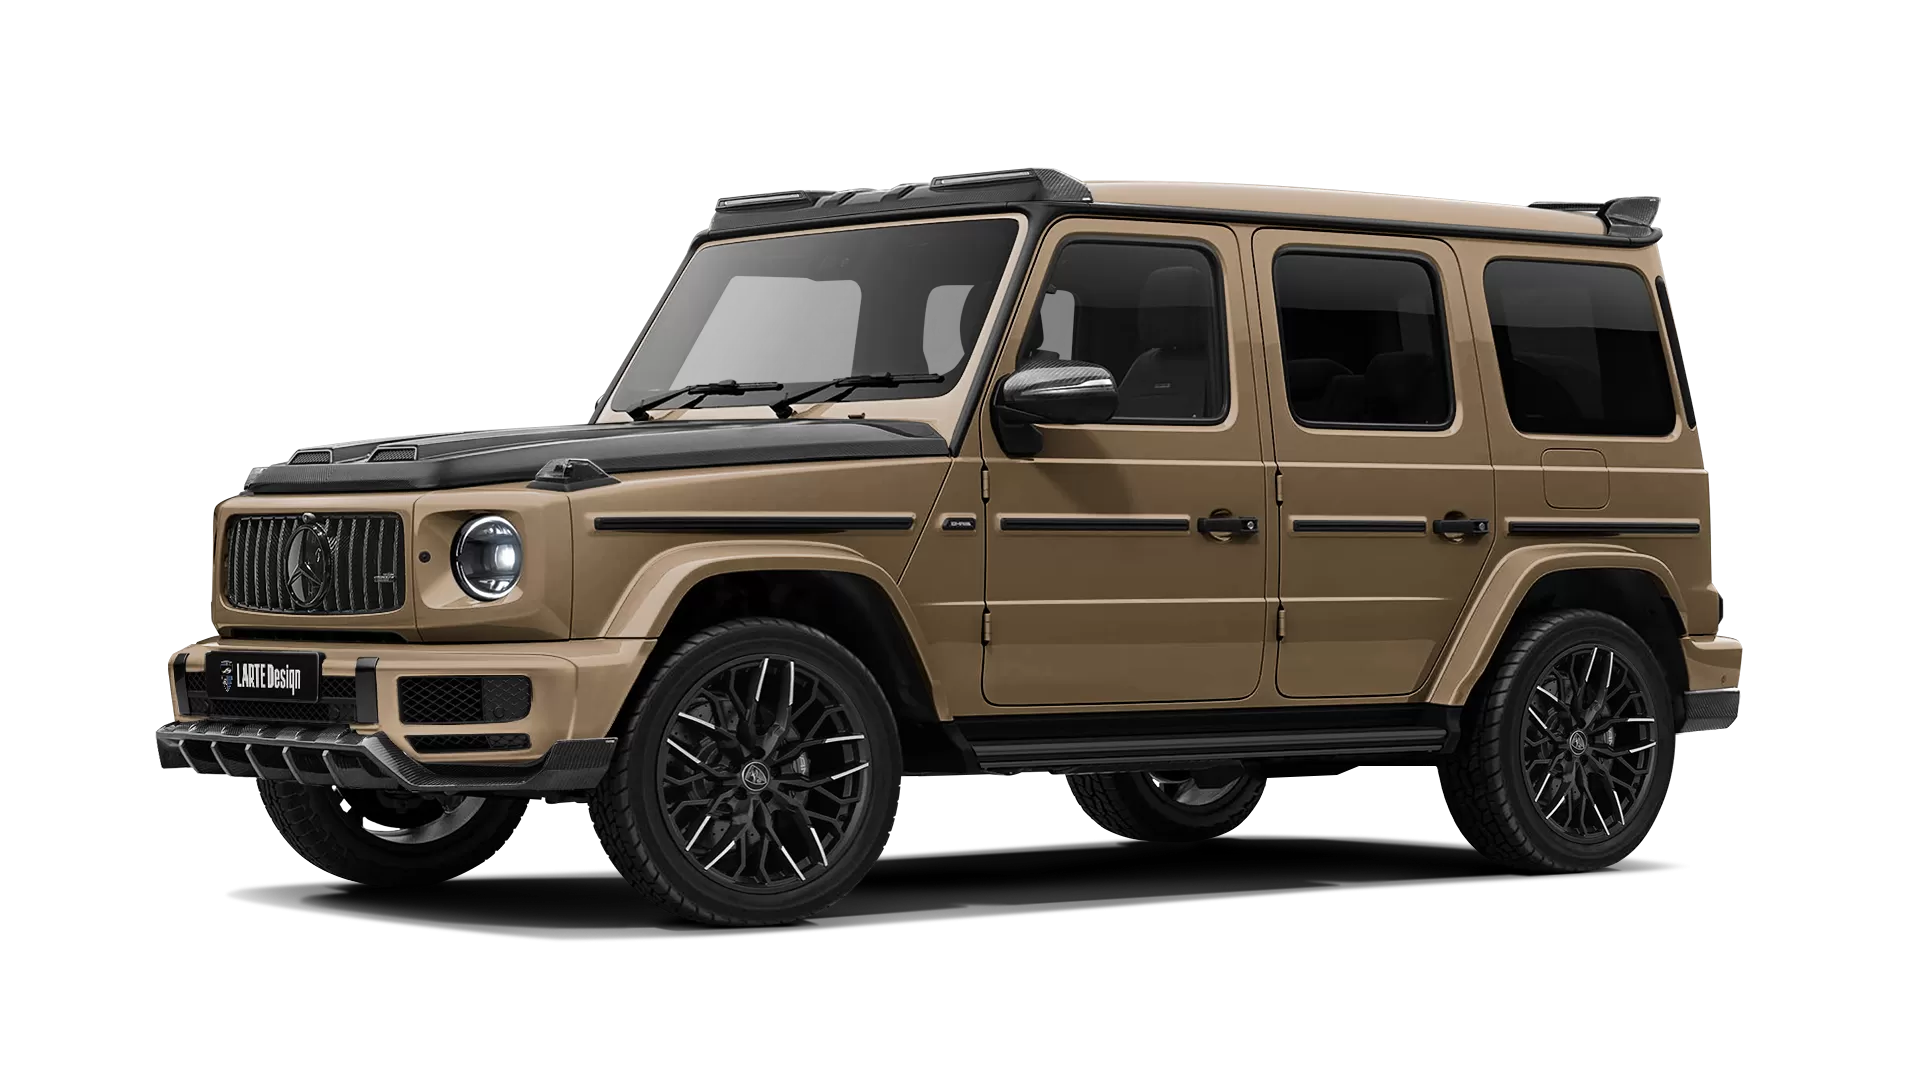 Mercedes G class W463 with carbon body kit: front view shown in Desert Sand